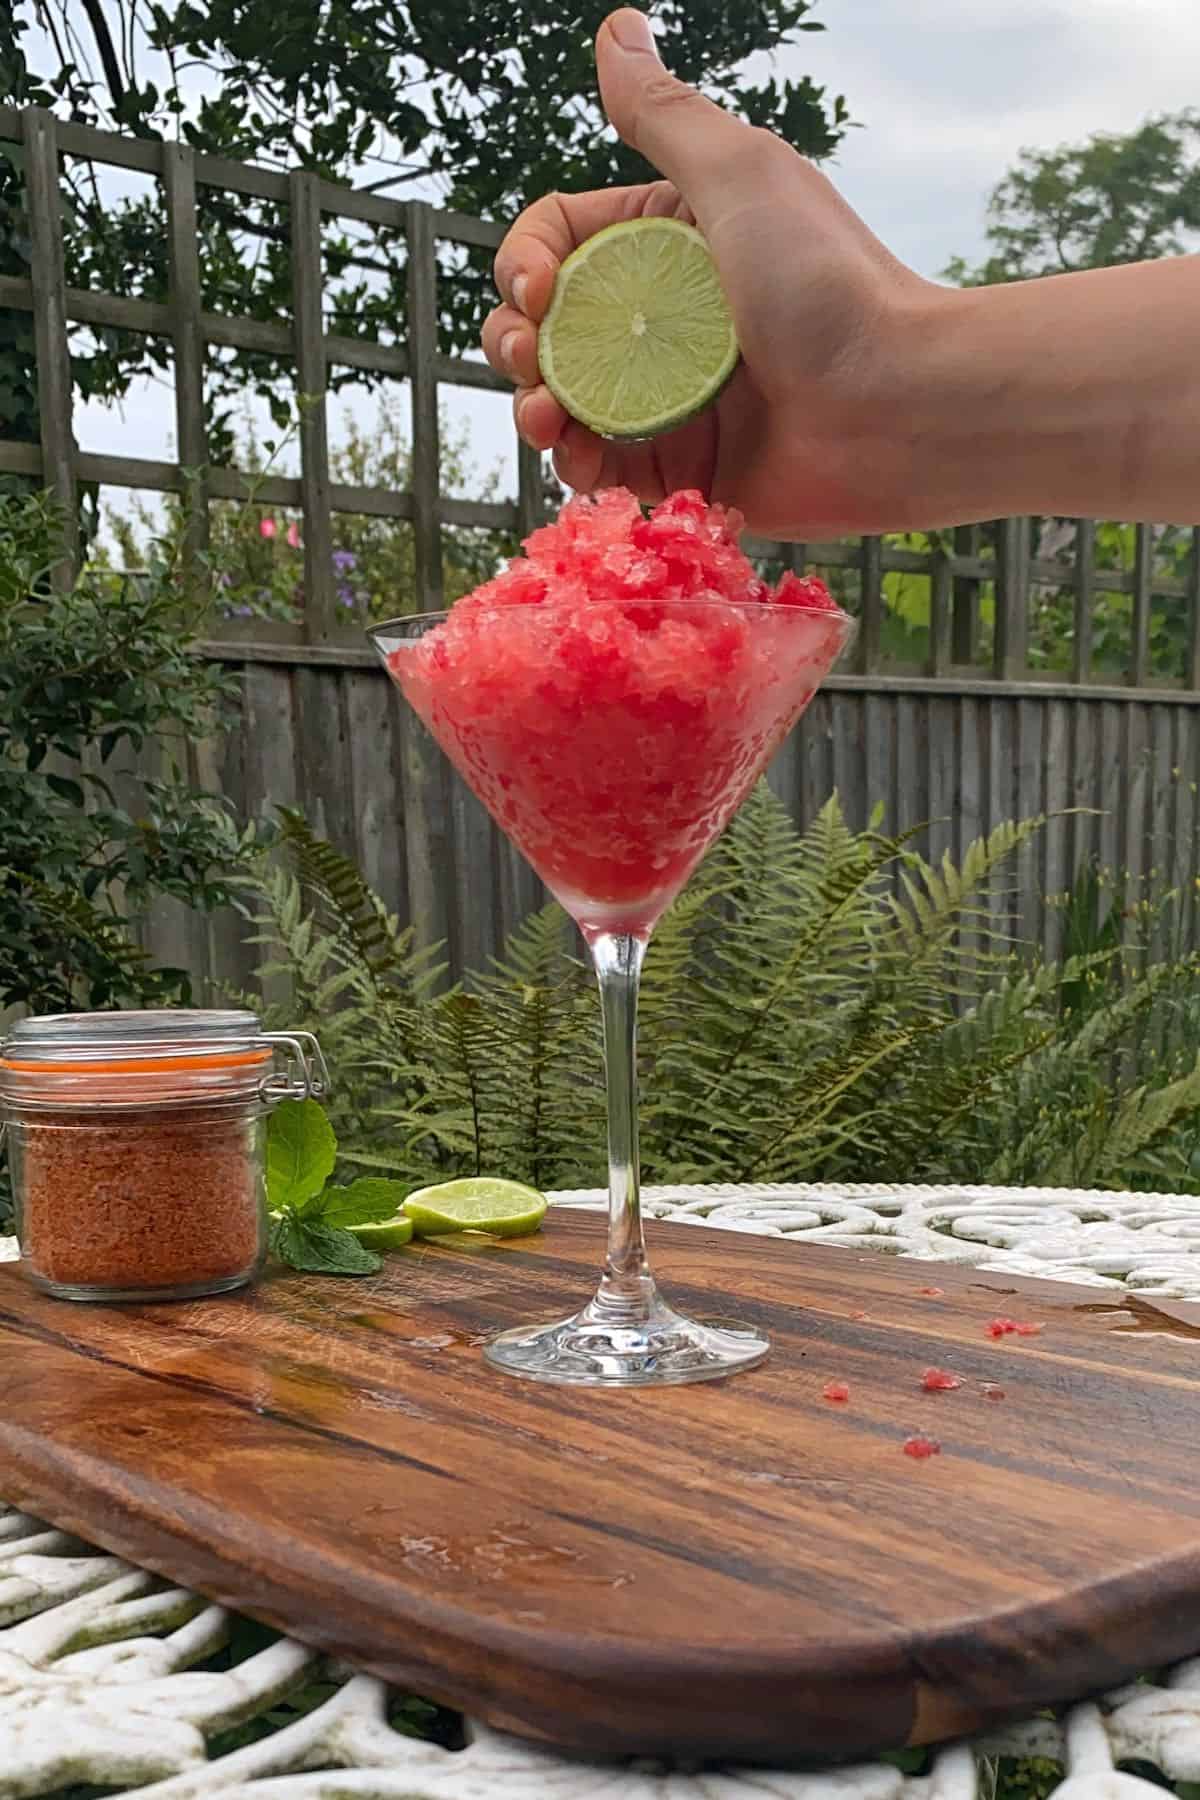 Topping watermelon slush with lime